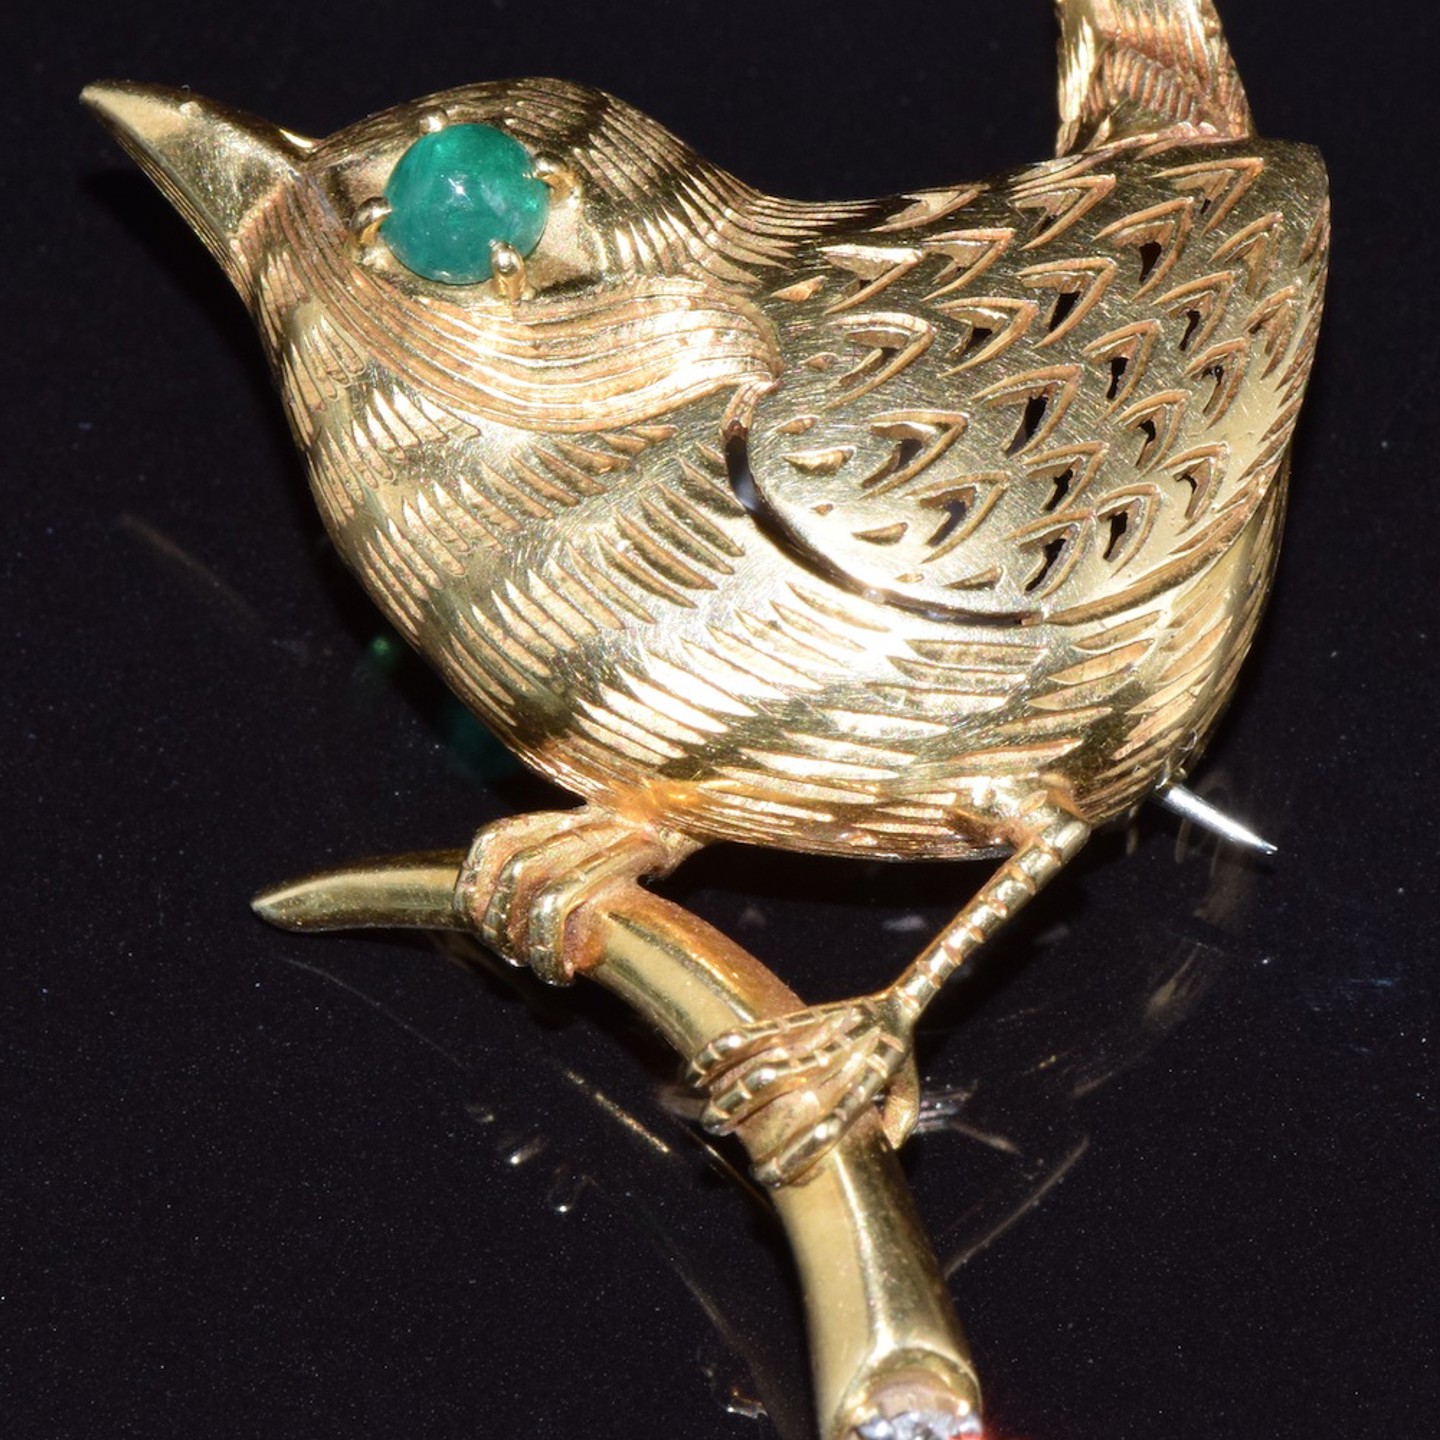 Cartier 1963 Novelty Bird Brooch Modelled As A Wren Perched On A Branch. Sold For £2,800